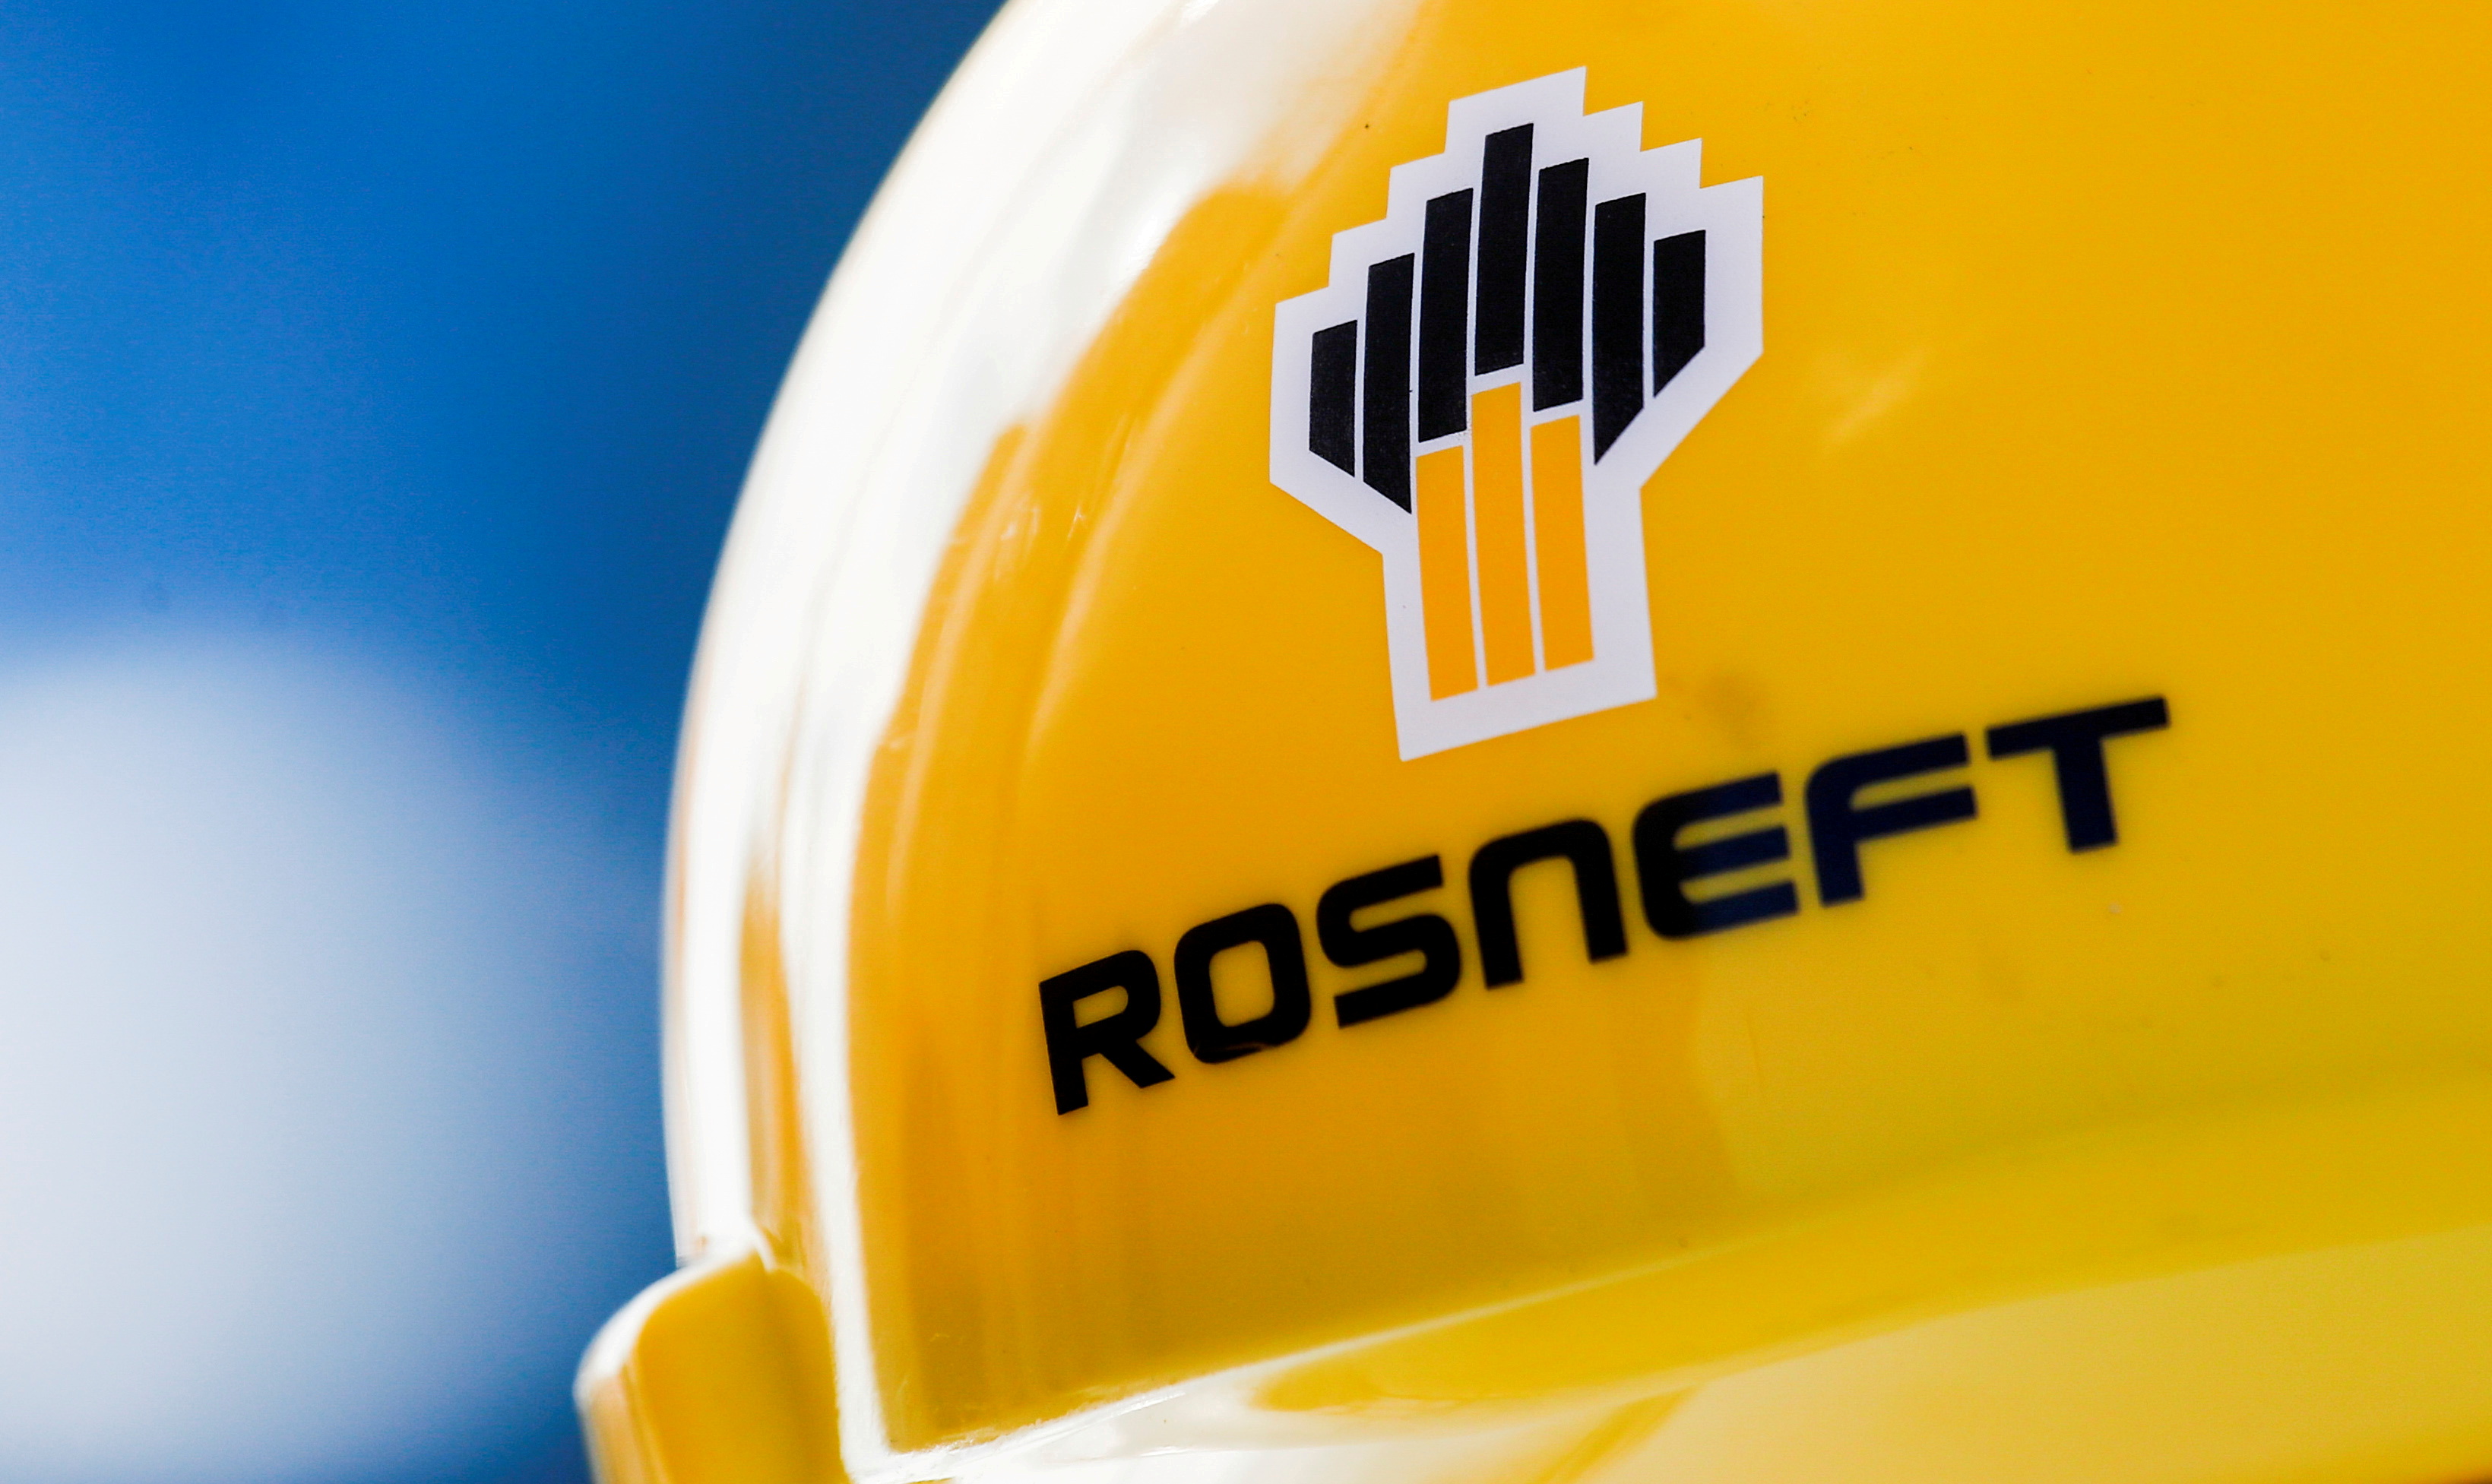 Rosneft logo is pictured on a safety helmet in Vung Tau